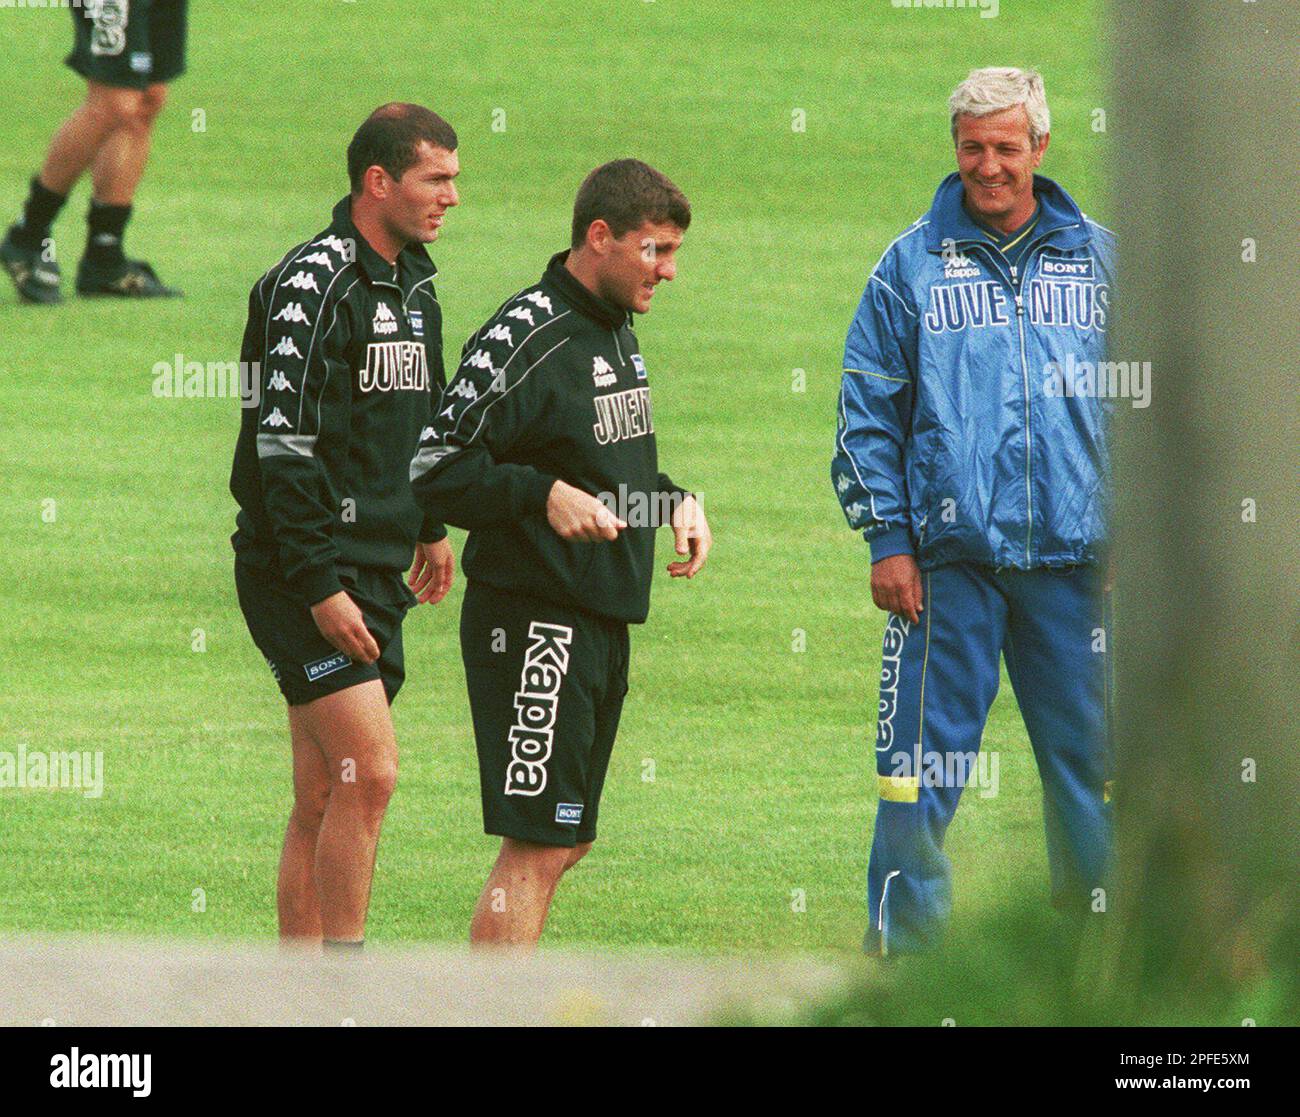 Marcello Lippi, right, coach of Juventus Turin soccer team watches Zinedine  Zidane, left, and Christian Vieri during a closed training session at  Lohhof near Munich, Germany, Tuesday, May 27, 1997. The Juventus